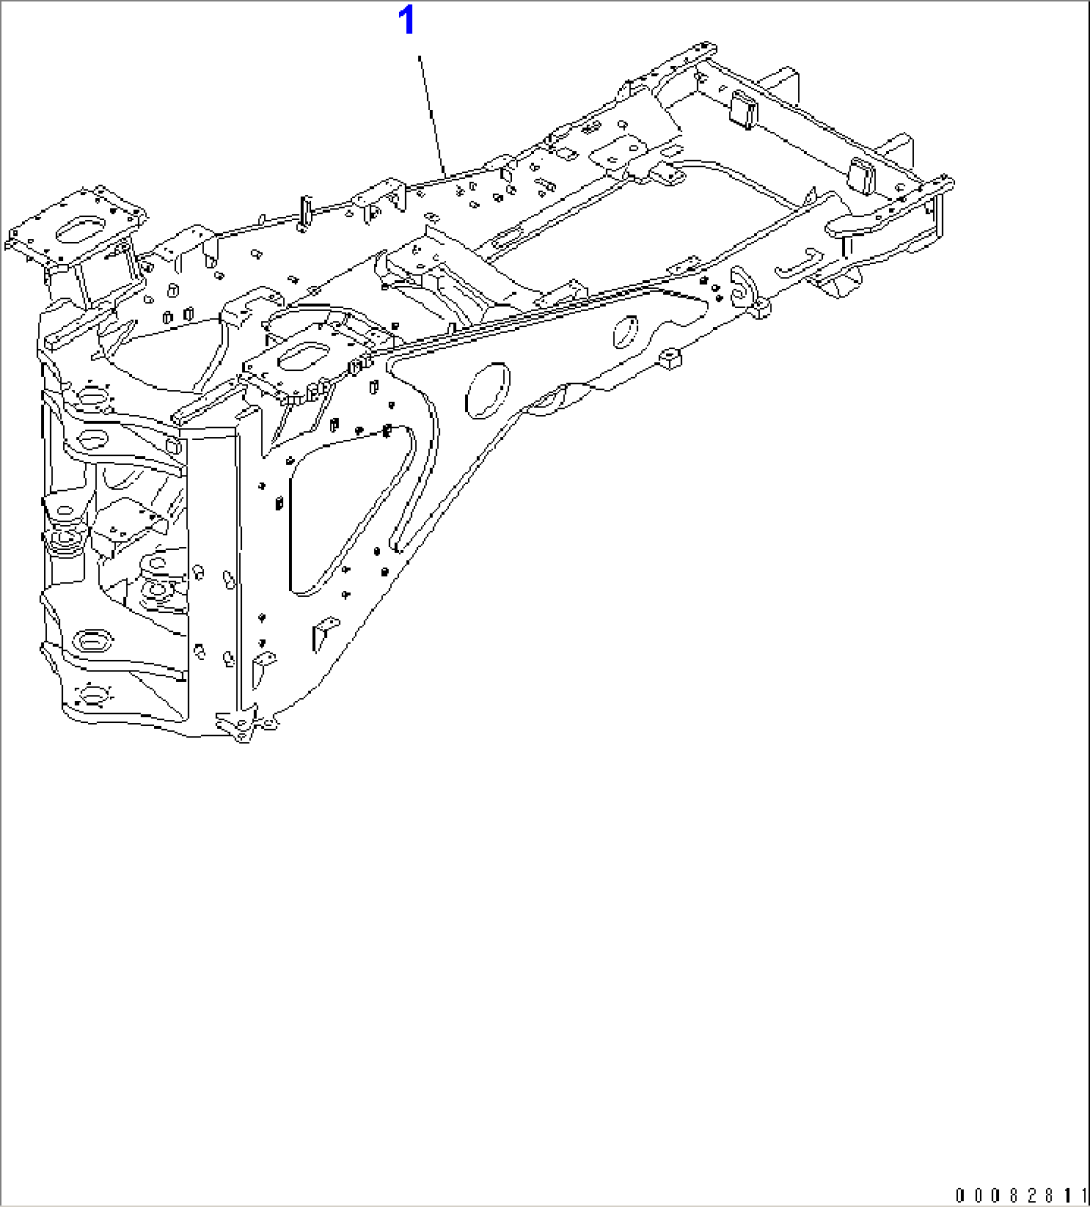 REAR FRAME (WITH HYDRAULIC QUICK COUPLER) (WITH UNDER GUARD)(#50001-.)